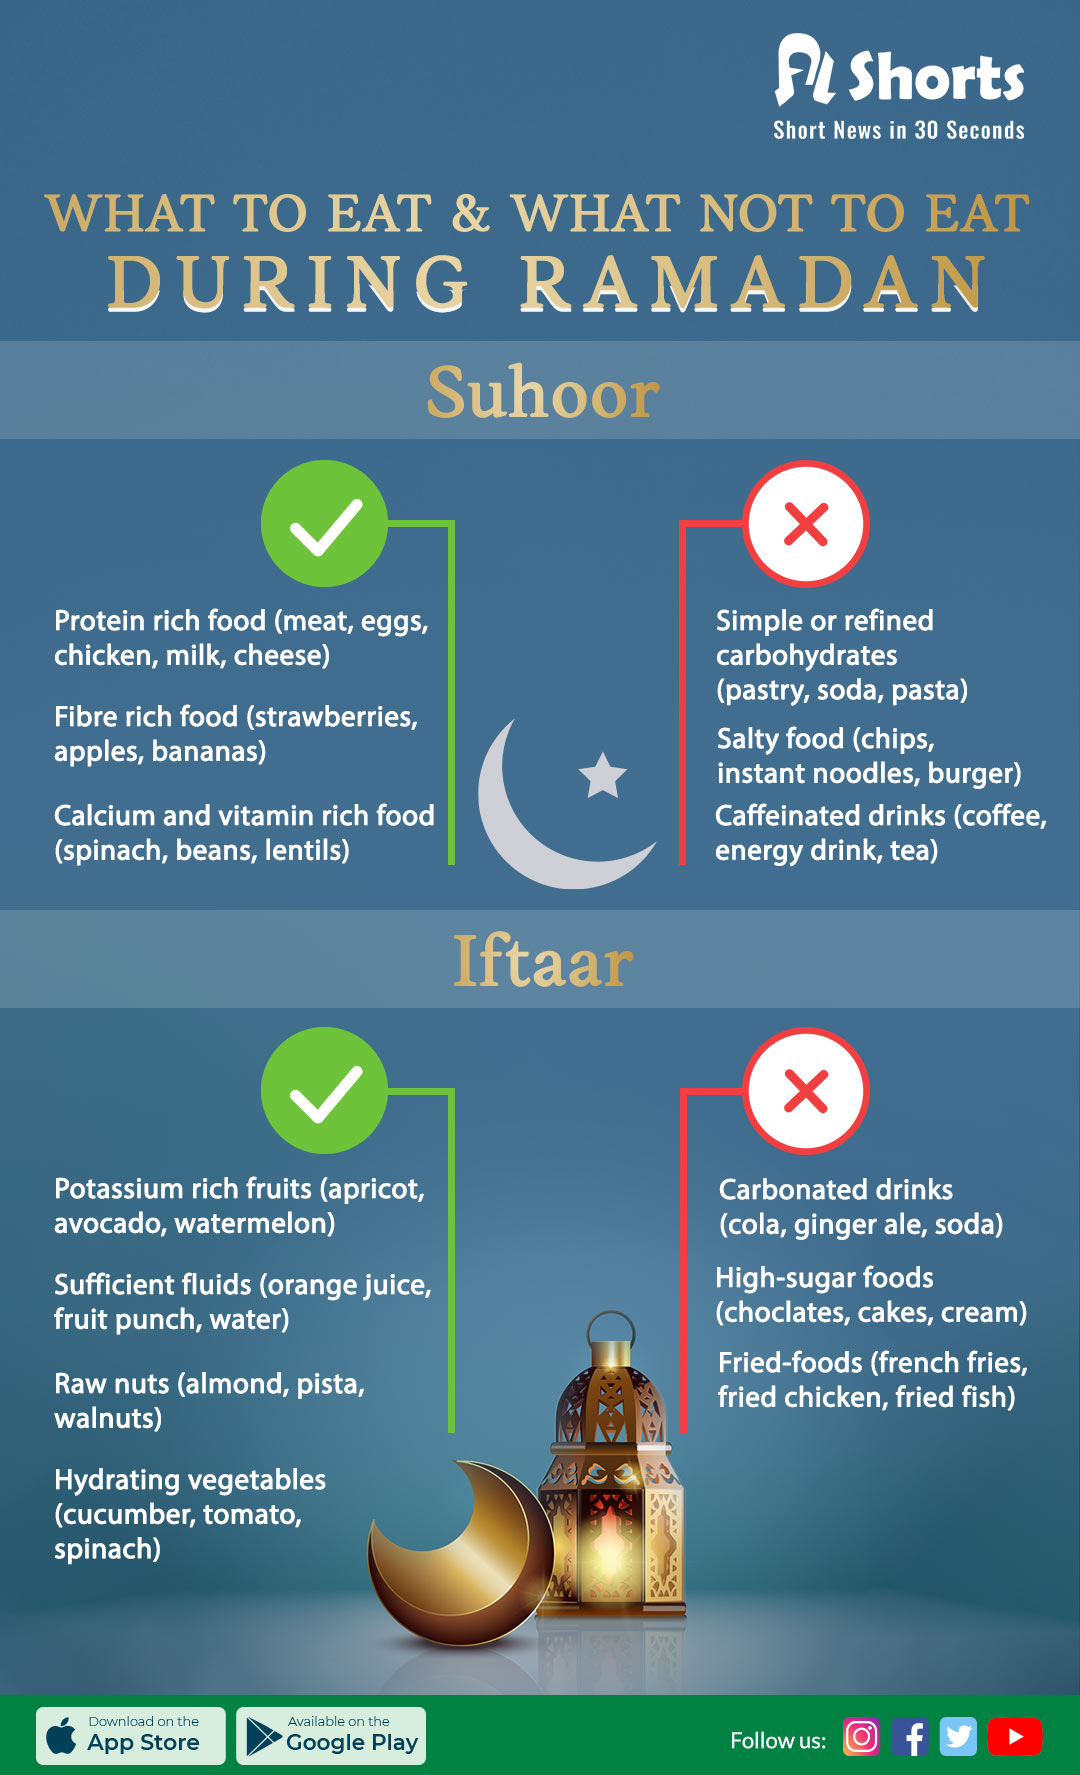 What TO EAT & what NOT TO EAT during Holy Month of Ramadan